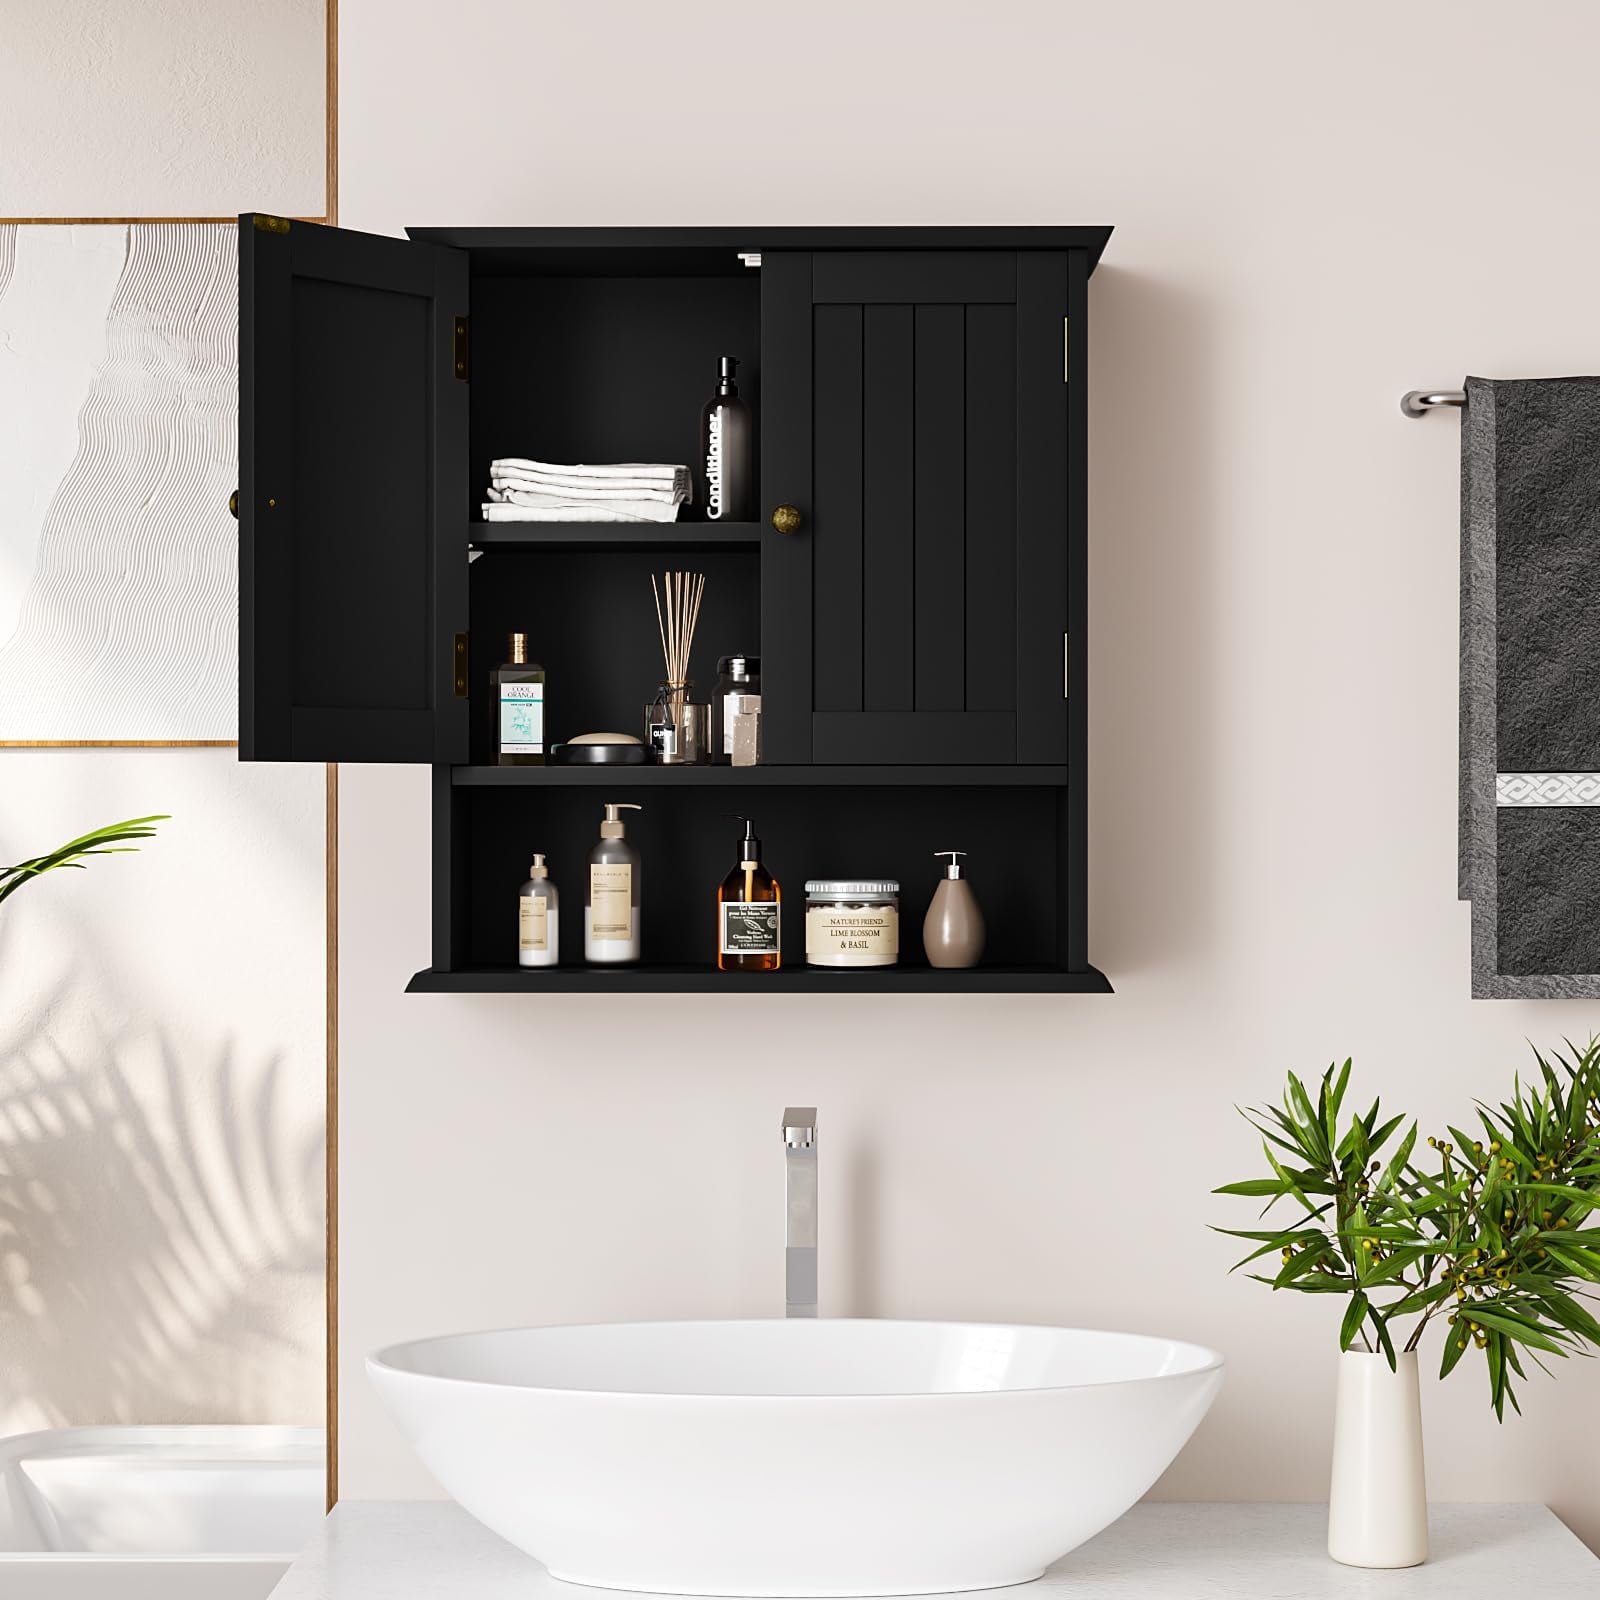 Smuxee Bathroom Wall Storage Cabinets with Door and Open Shelves,over the Toilet Storage,Black Small